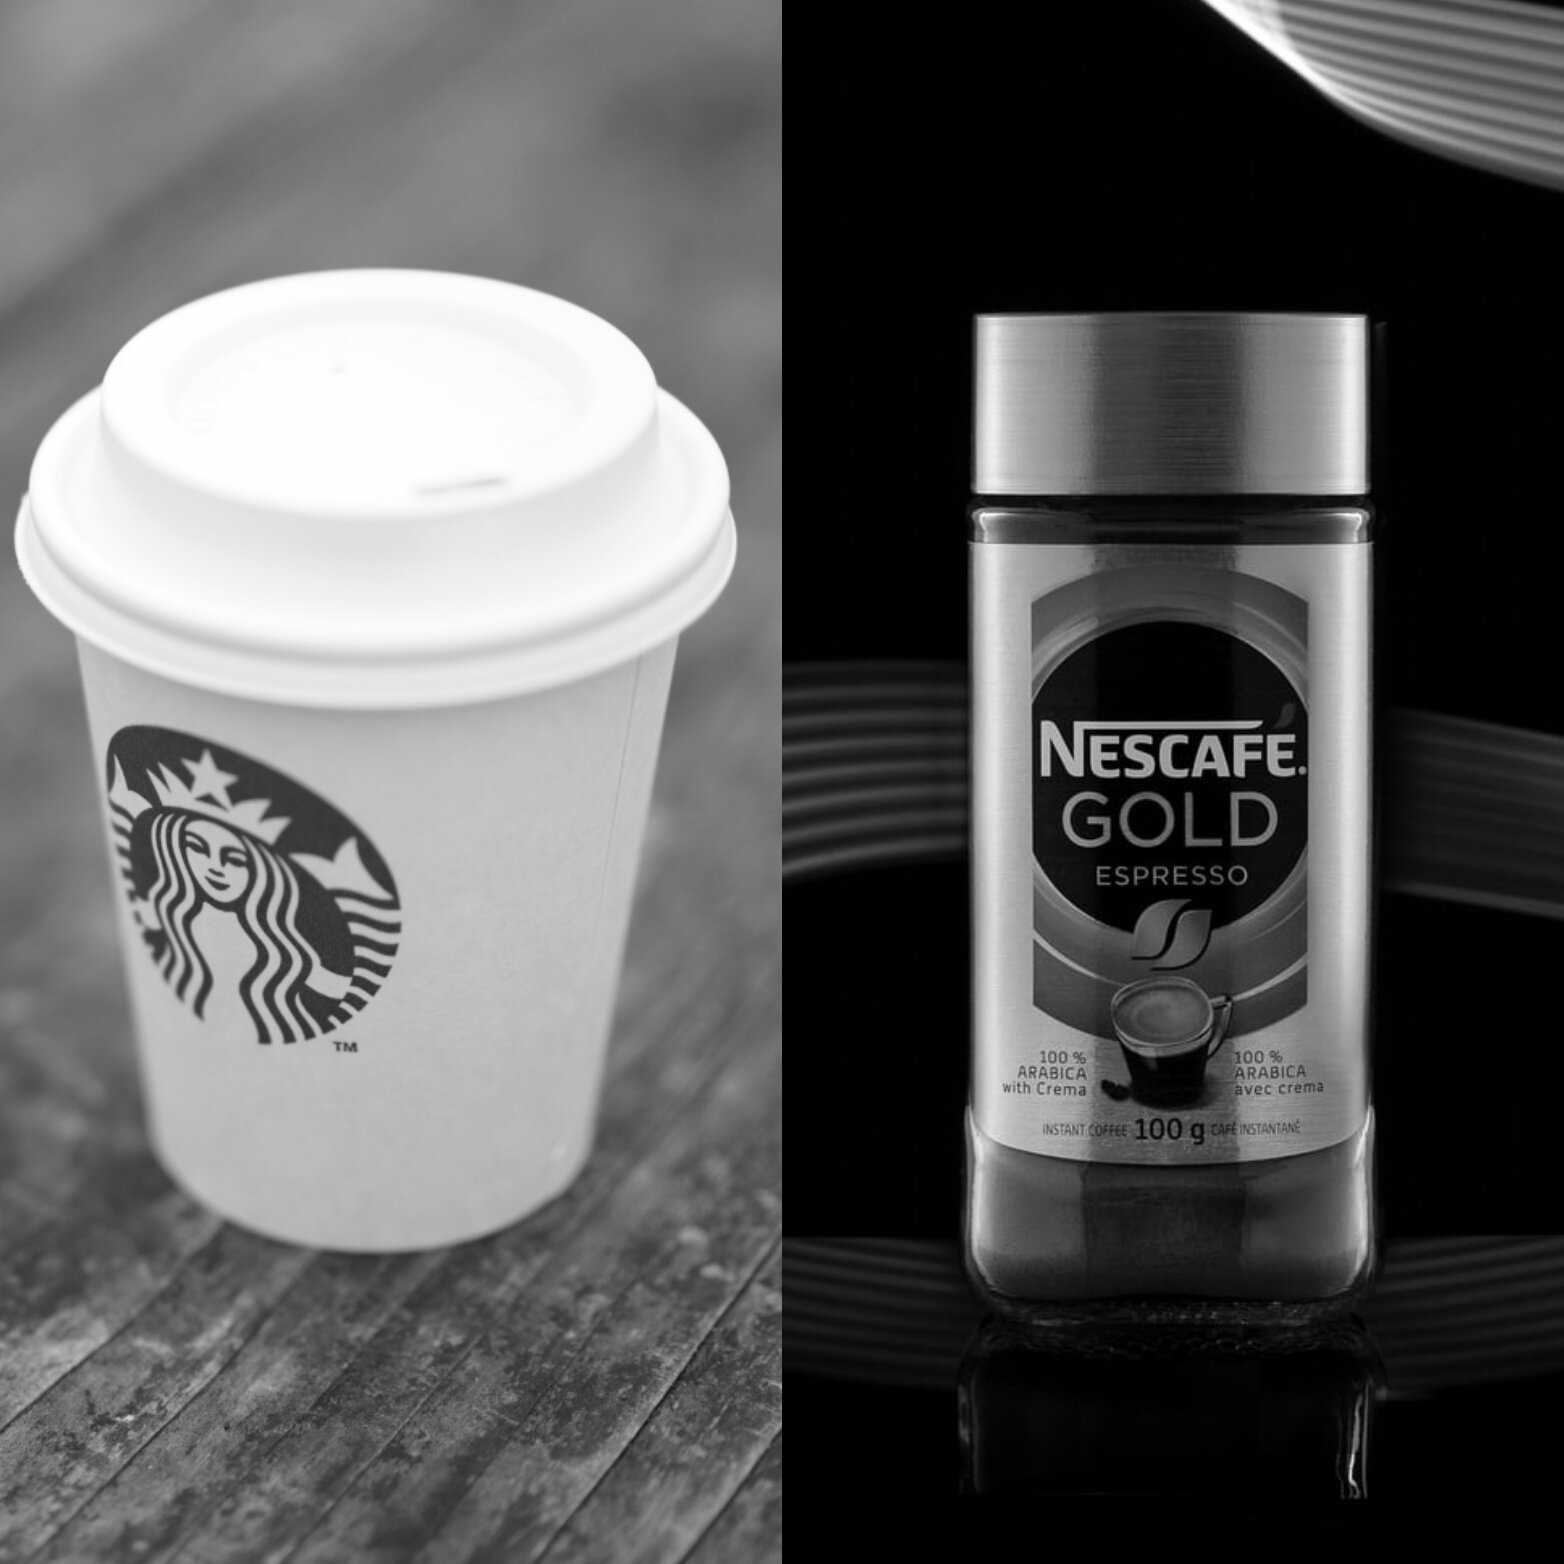 A Starbucks coffee cup and a jar of Nescafe Gold in a composite image